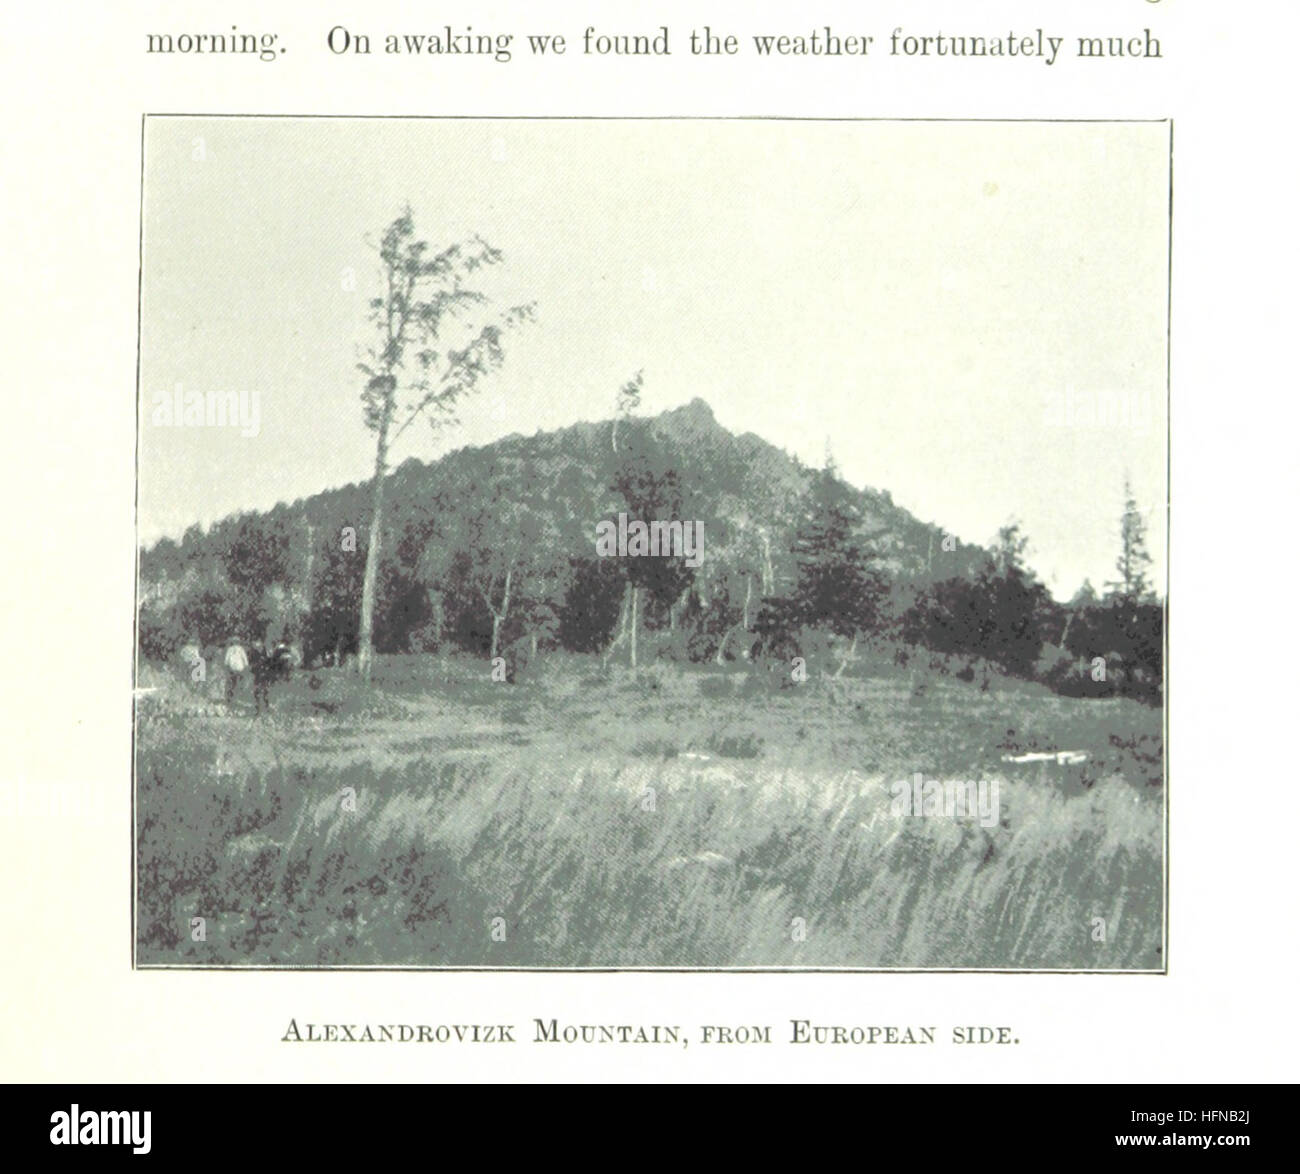 Image taken from page 49 of 'Reminiscences of Russia. The Ural Mountains and adjoining Siberian district in 1897' Image taken from page 49 of 'Reminiscences of Russia The Stock Photo